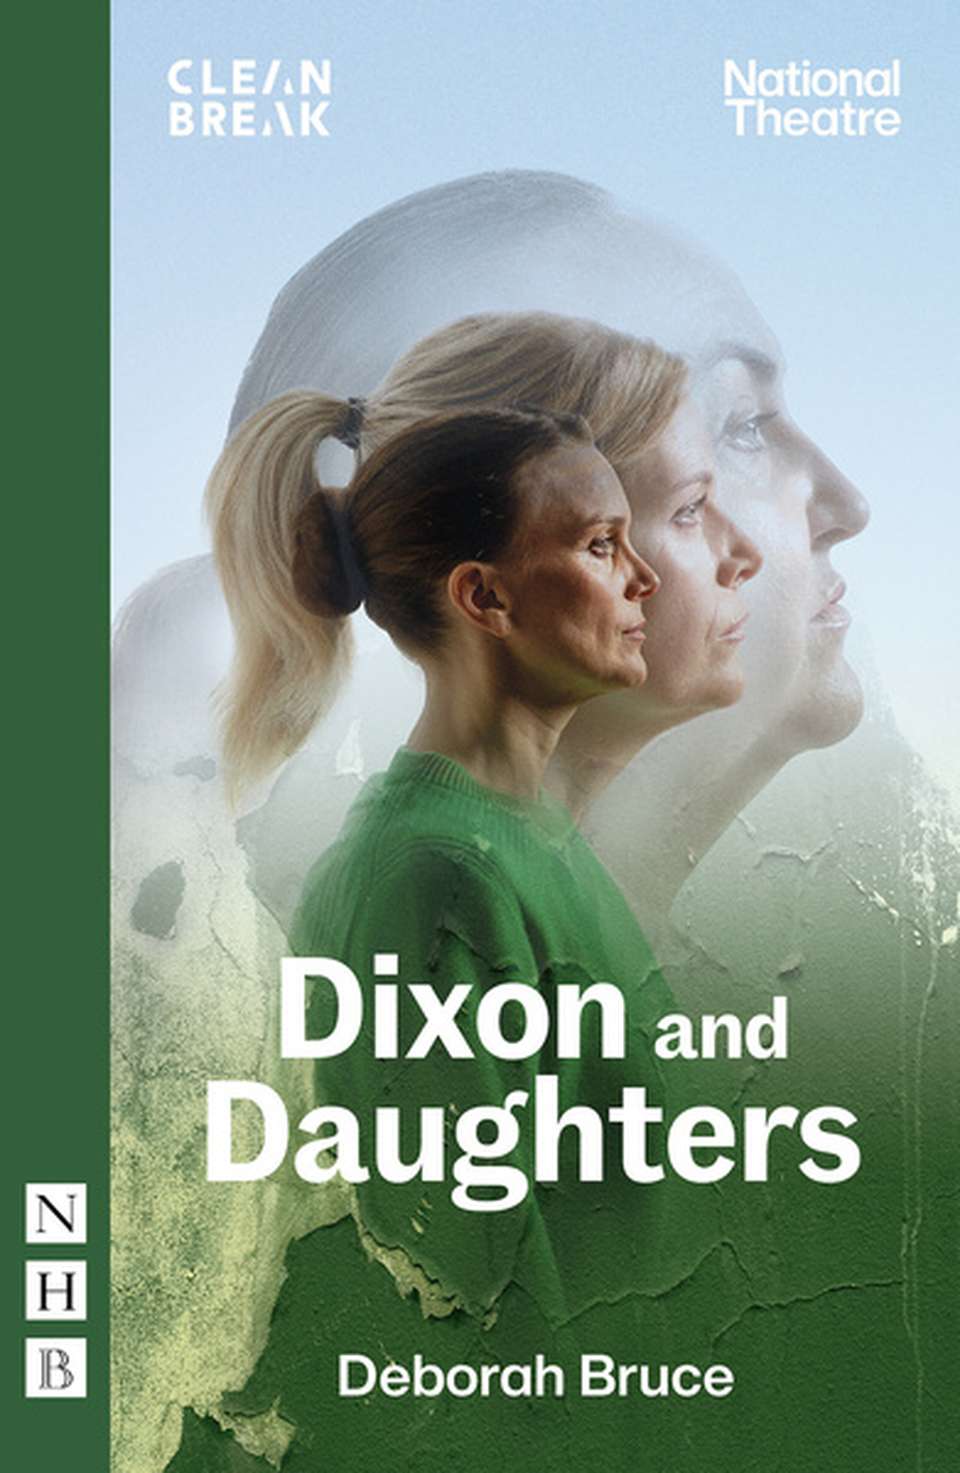 images/dixon-and-daughters-cover-24974-800x600.jpg